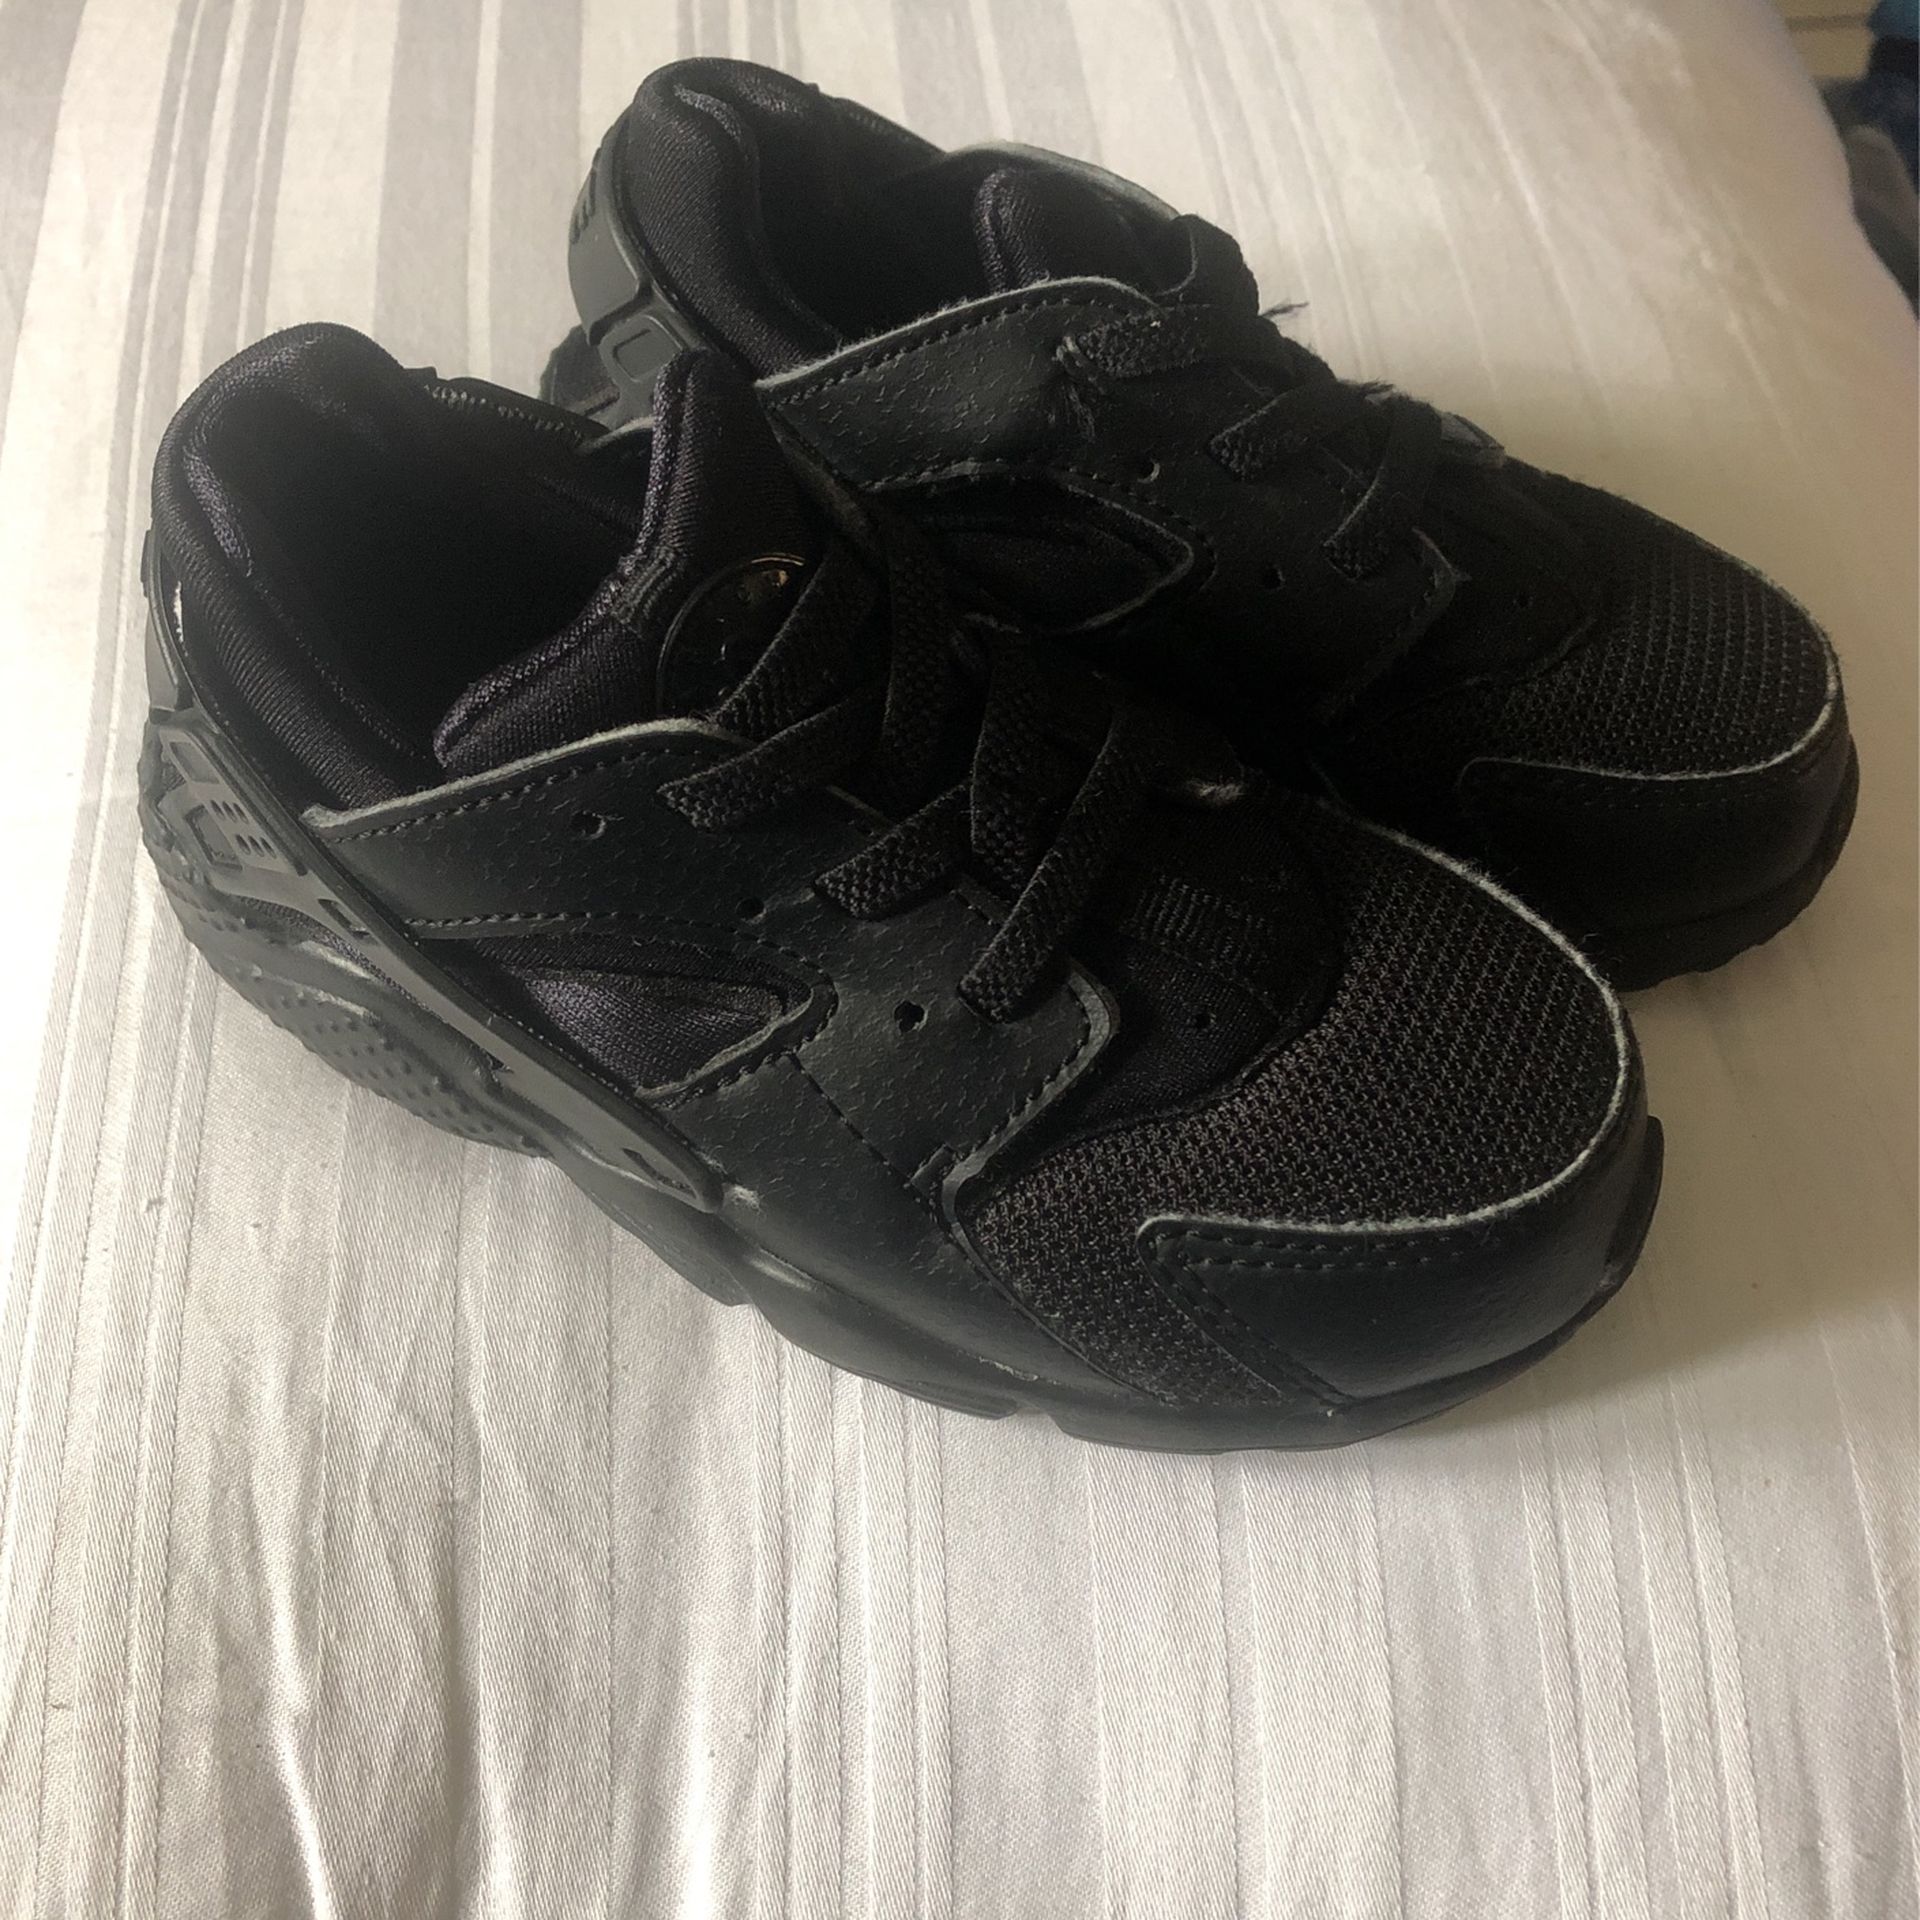 Nike Toddlers Size 9